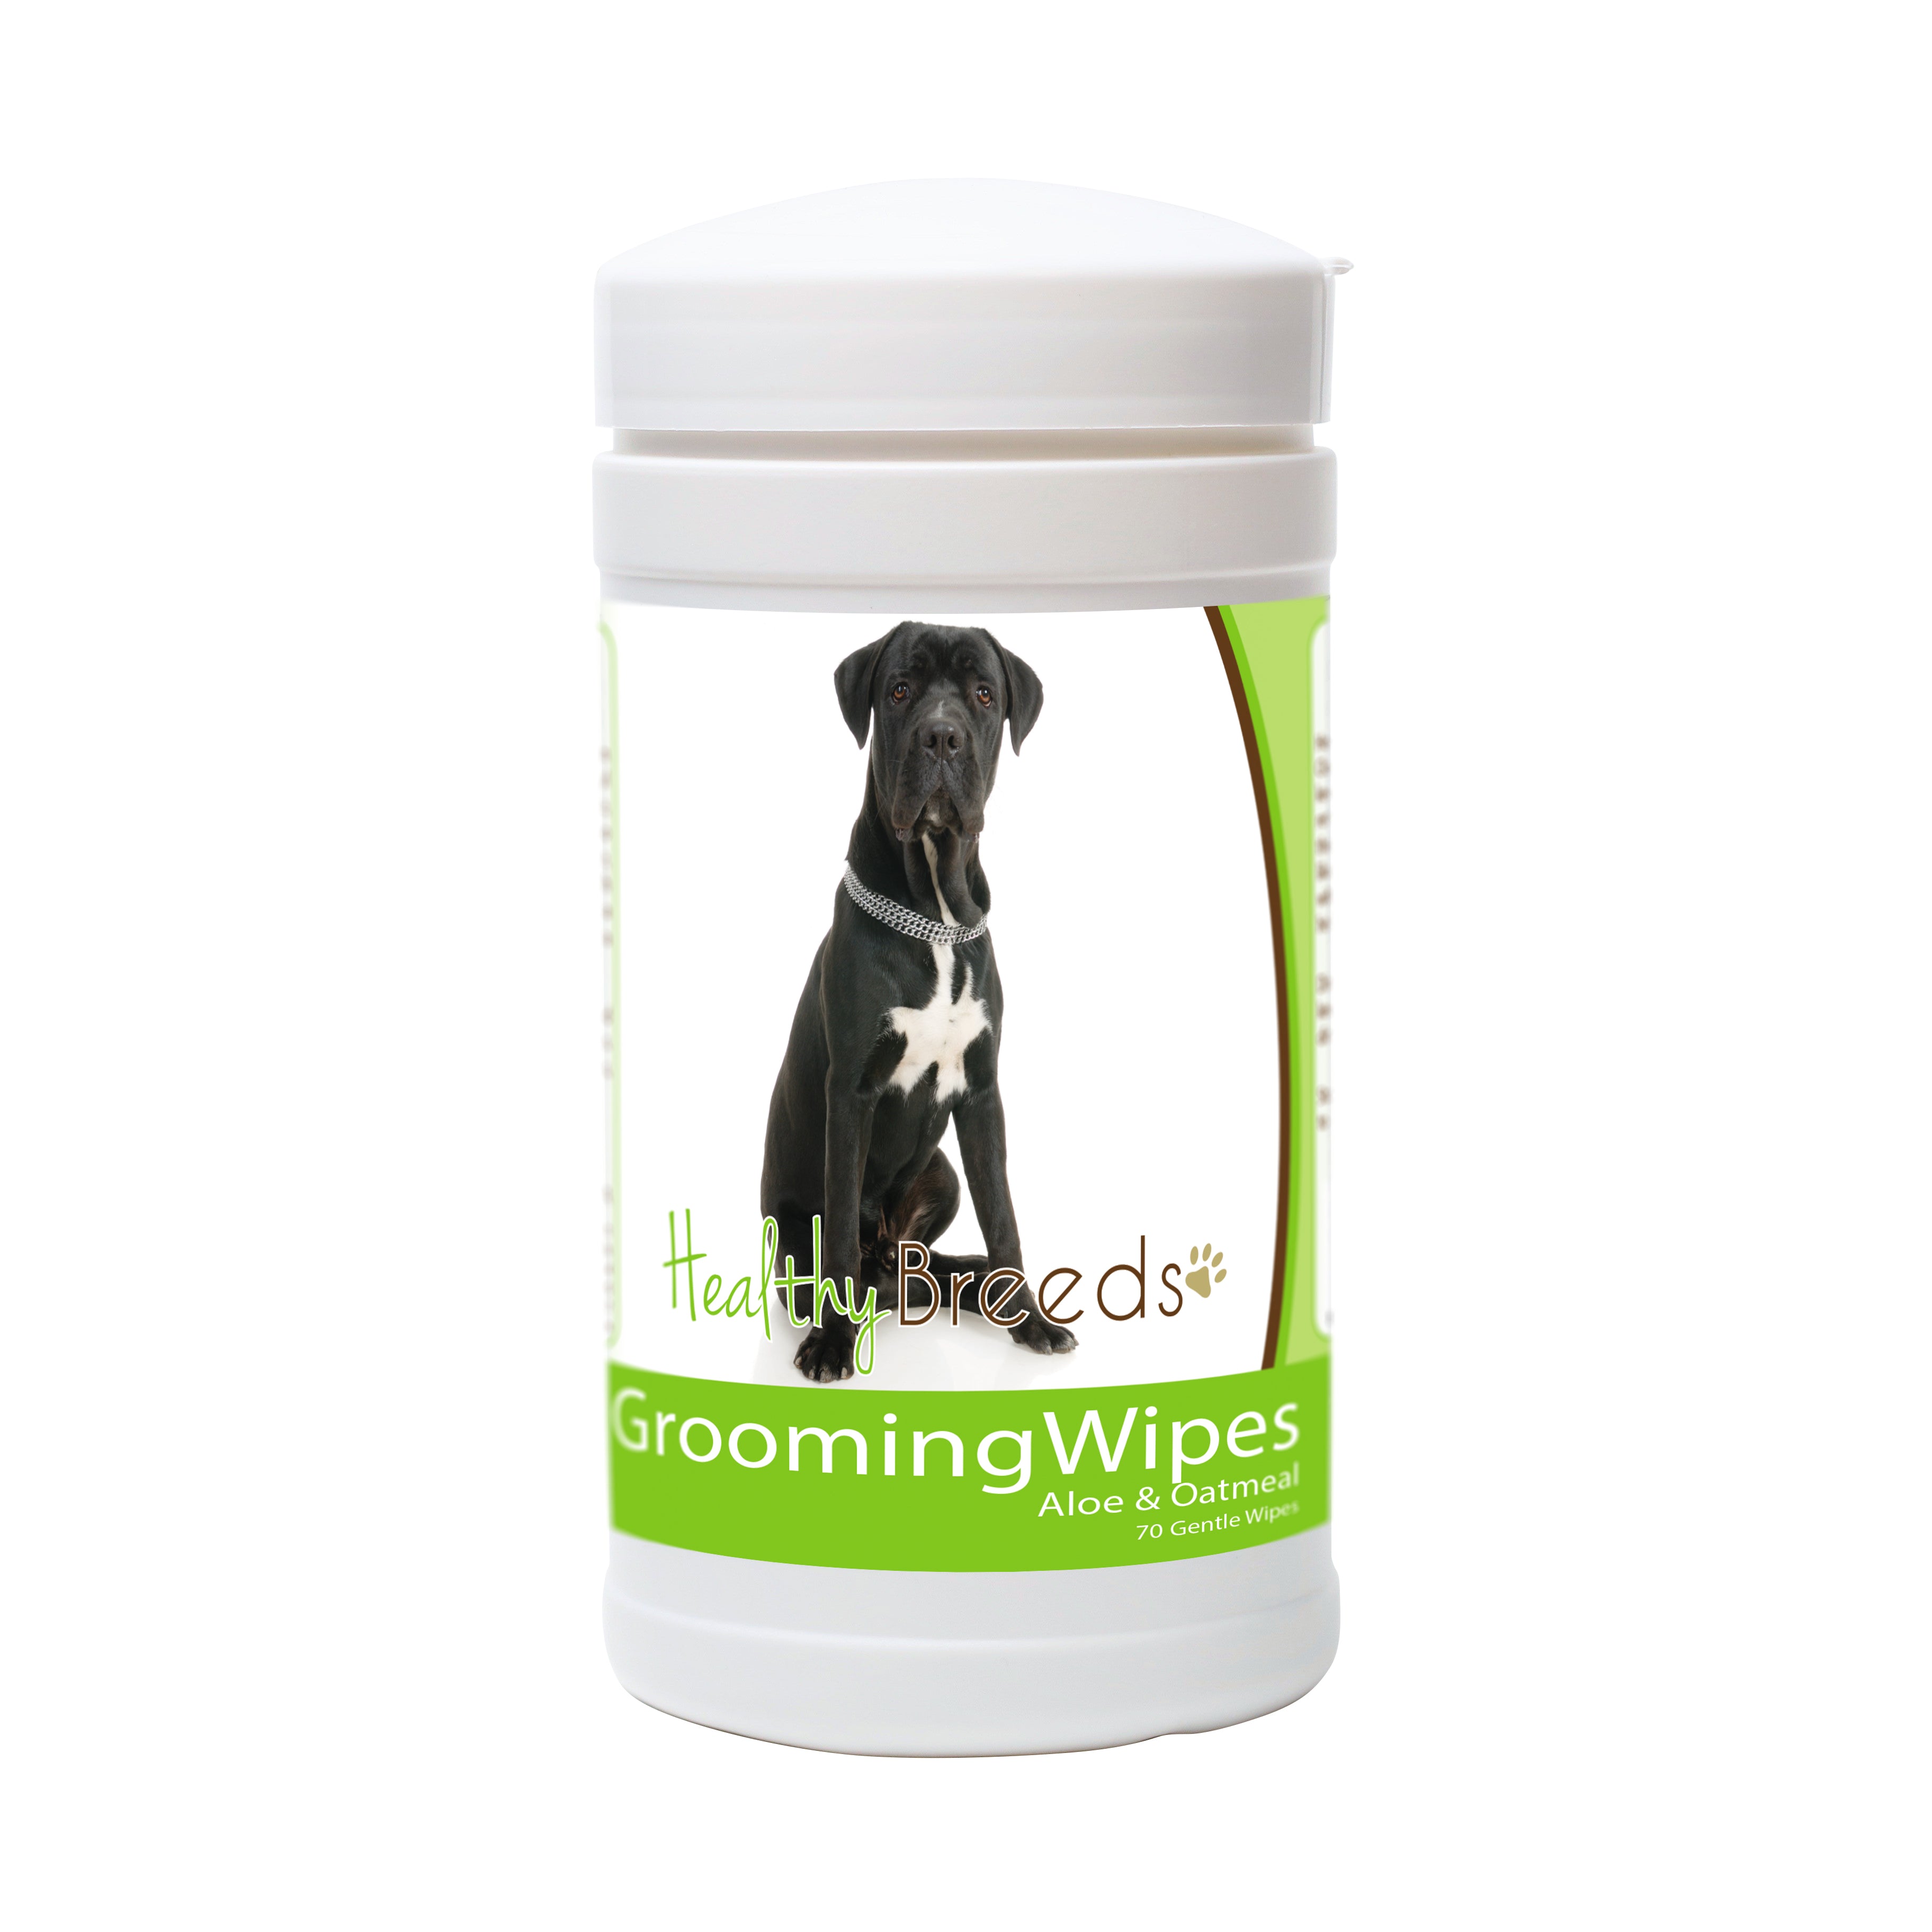 Cane Corso Grooming Wipes 70 Count